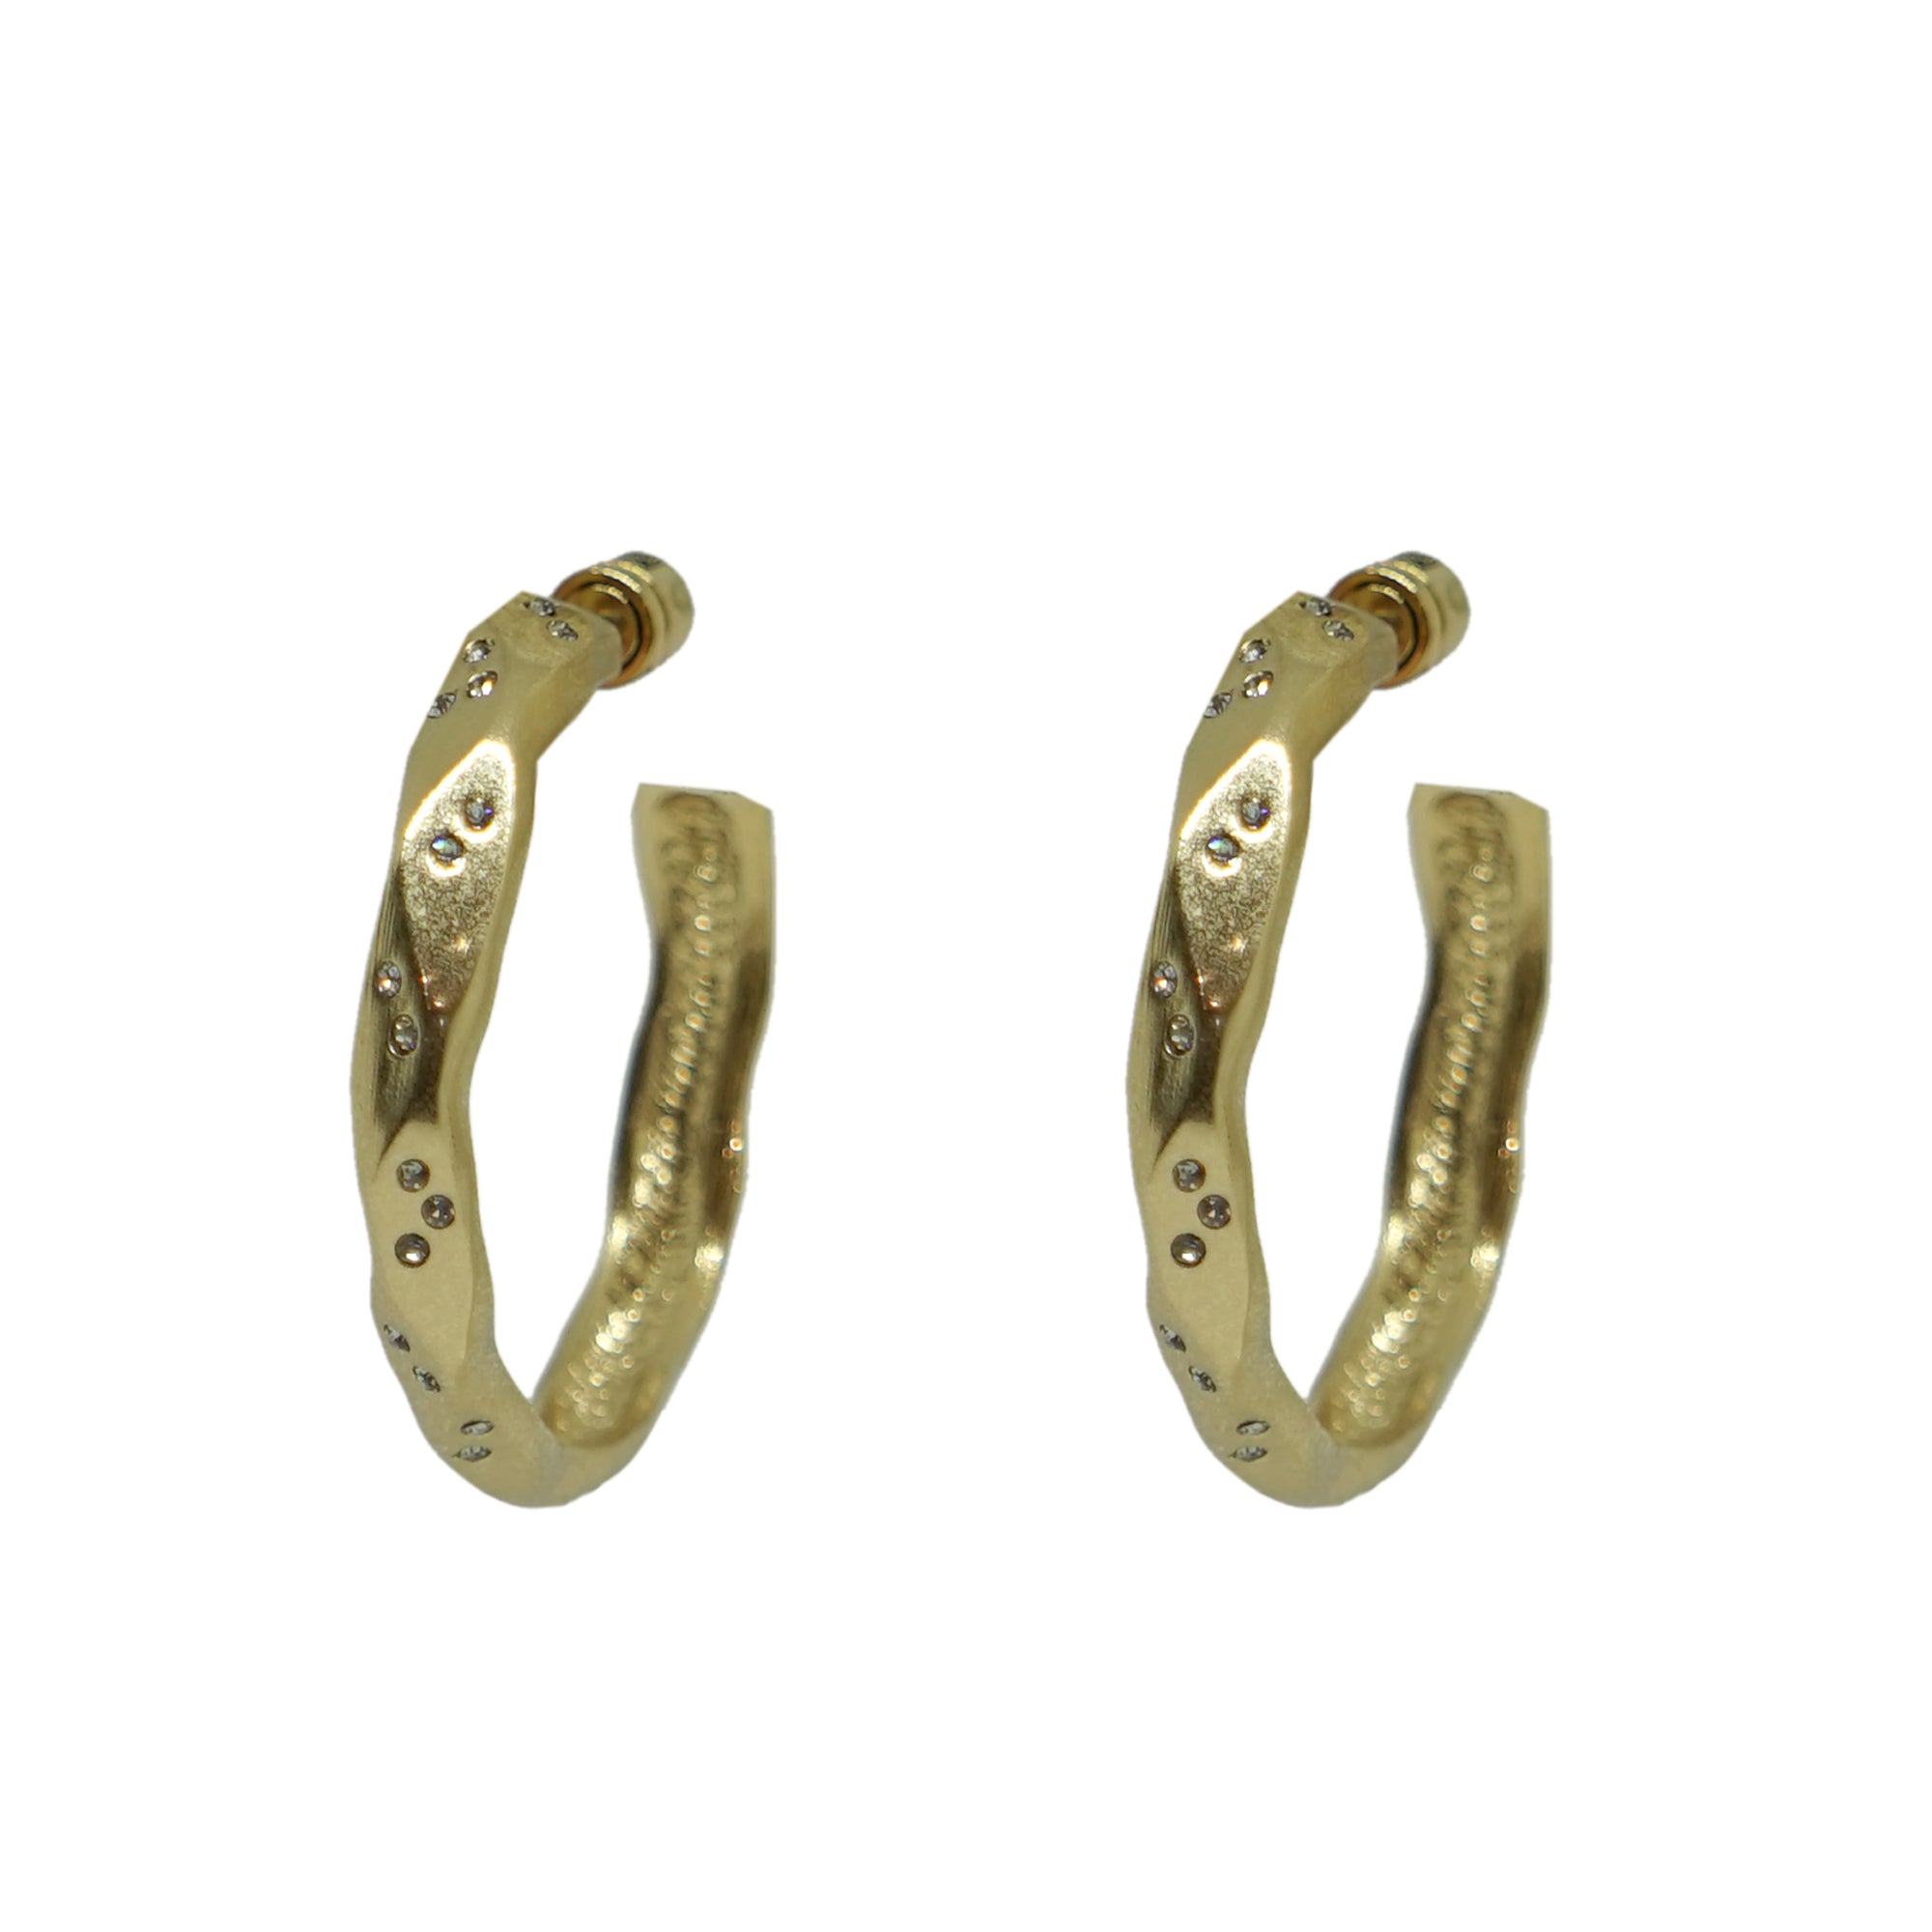 GOLD THIN WAVE 1.5" IMPRESSION HOOPS